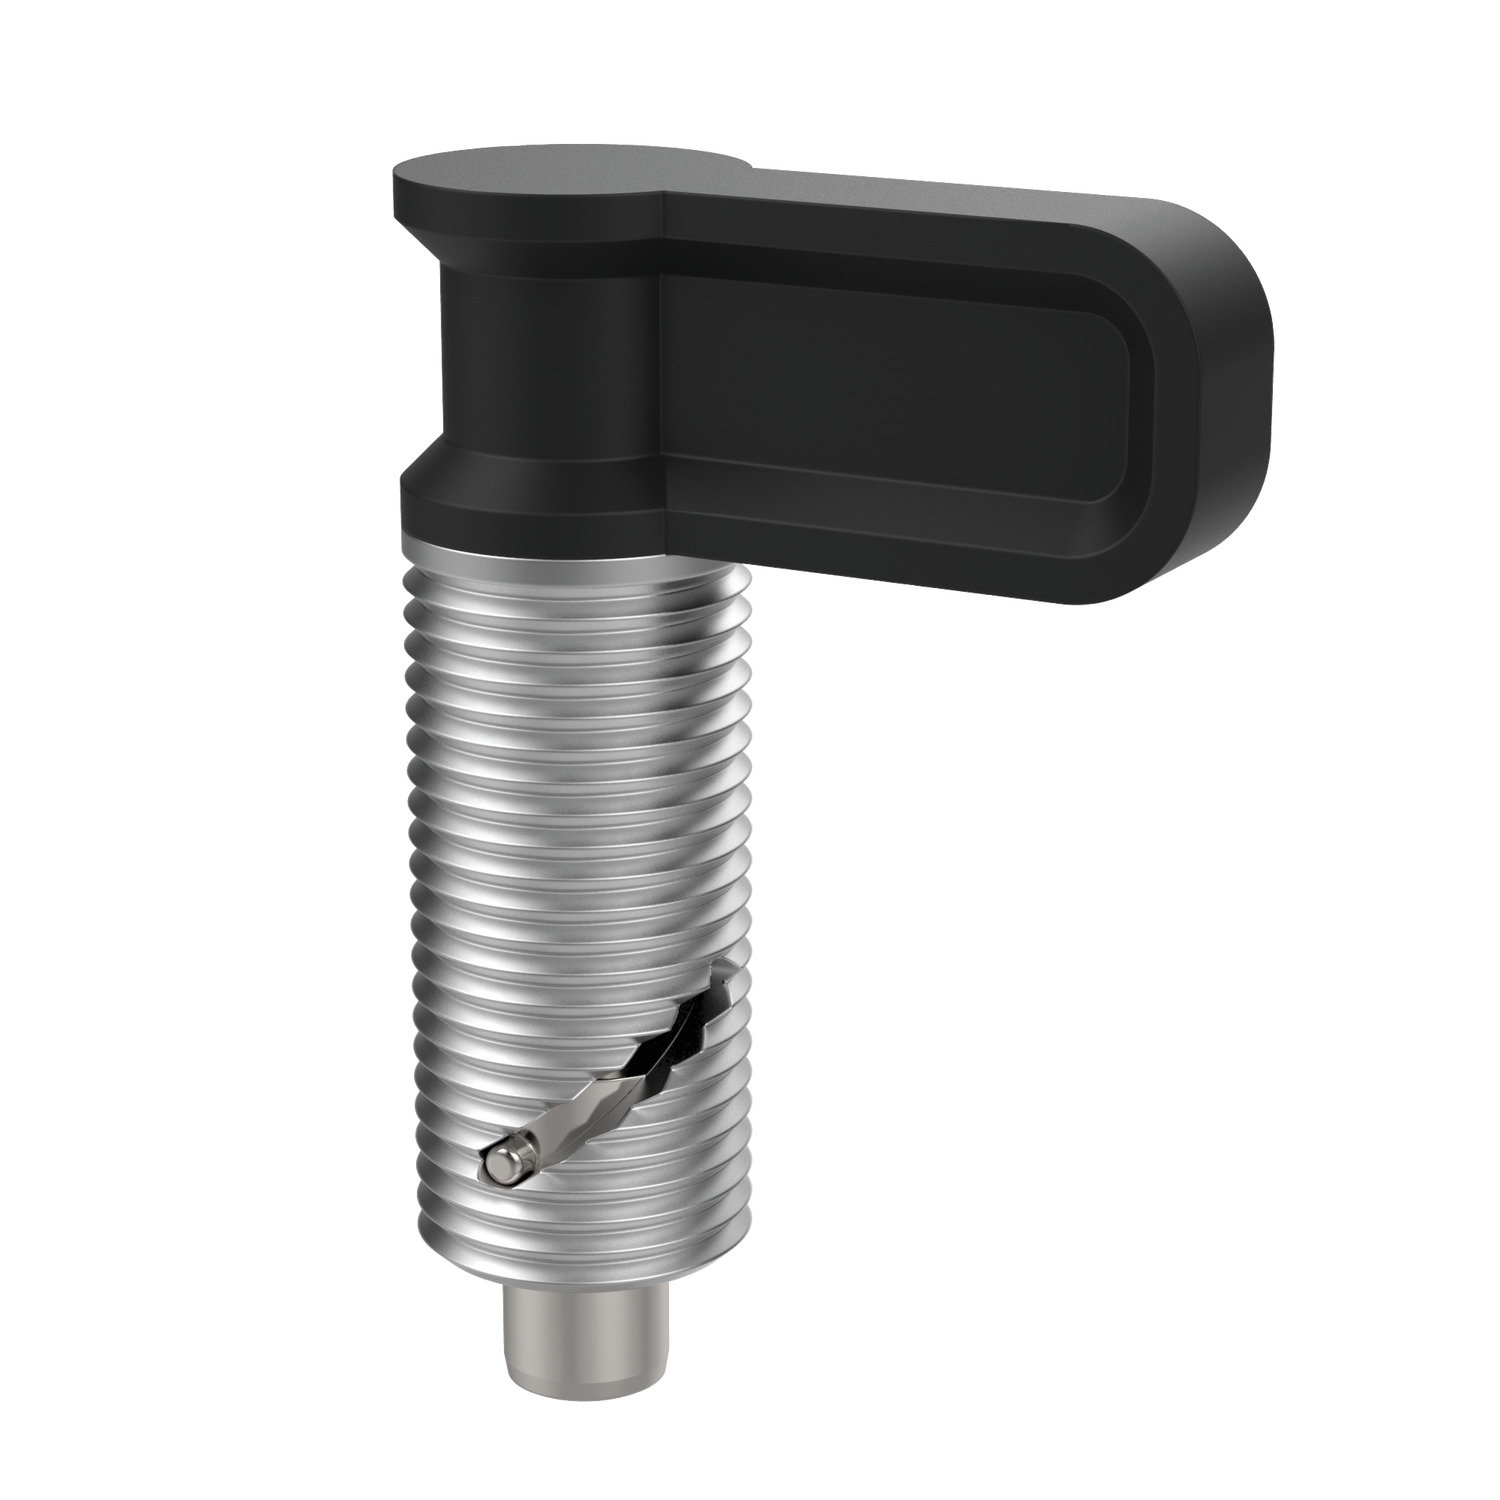 Product 32491, Index Plungers - Lever Grip pin protruding at start / 